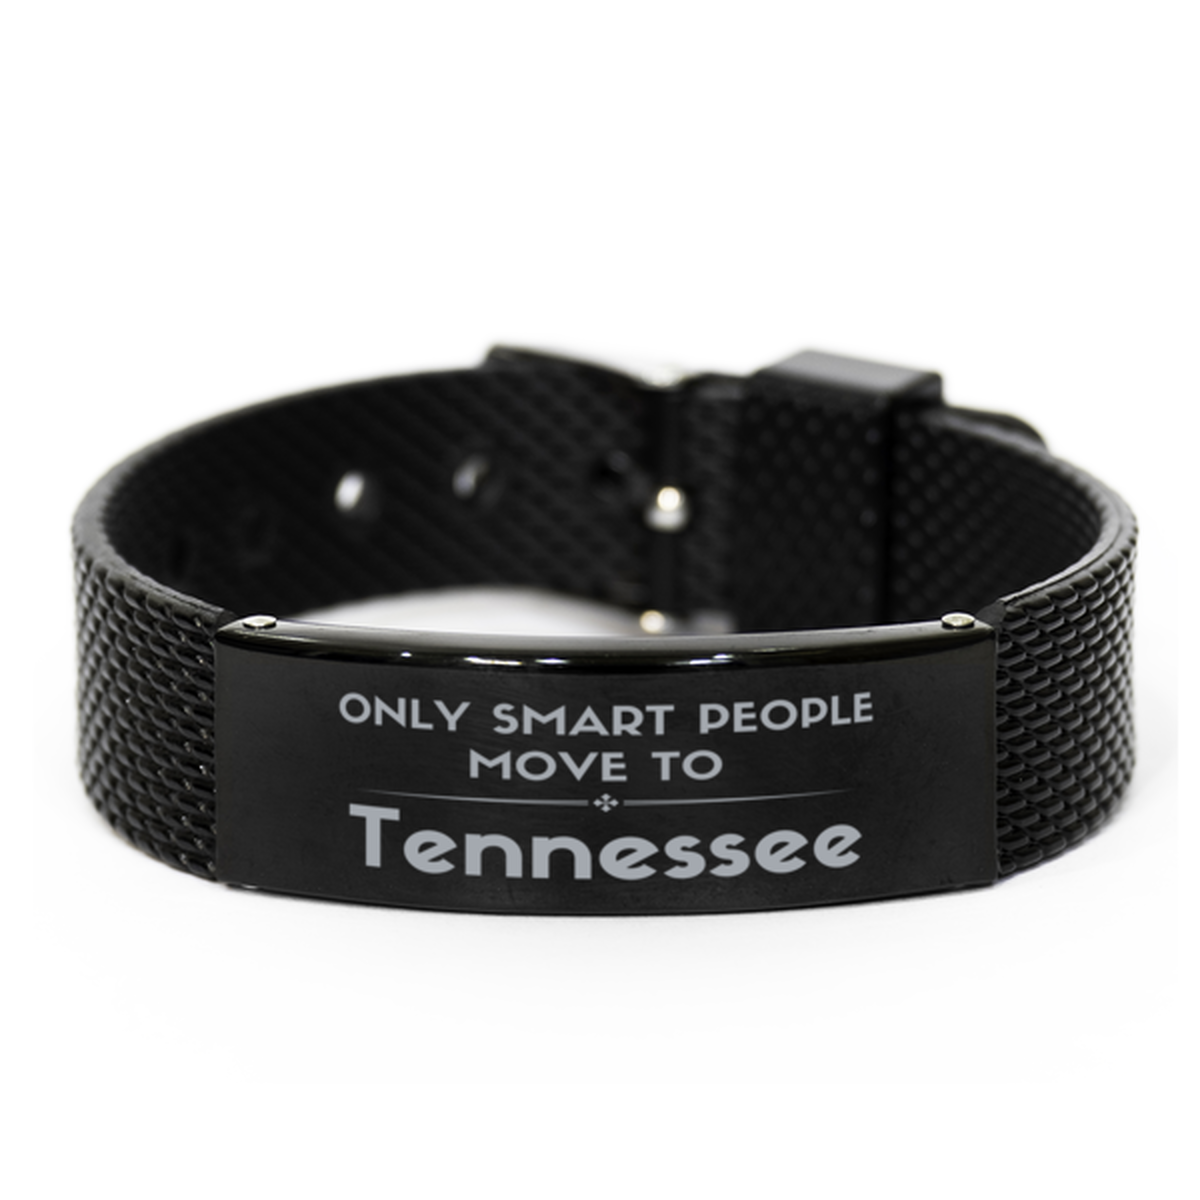 Only smart people move to Tennessee Black Shark Mesh Bracelet, Gag Gifts For Tennessee, Move to Tennessee Gifts for Friends Coworker Funny Saying Quote